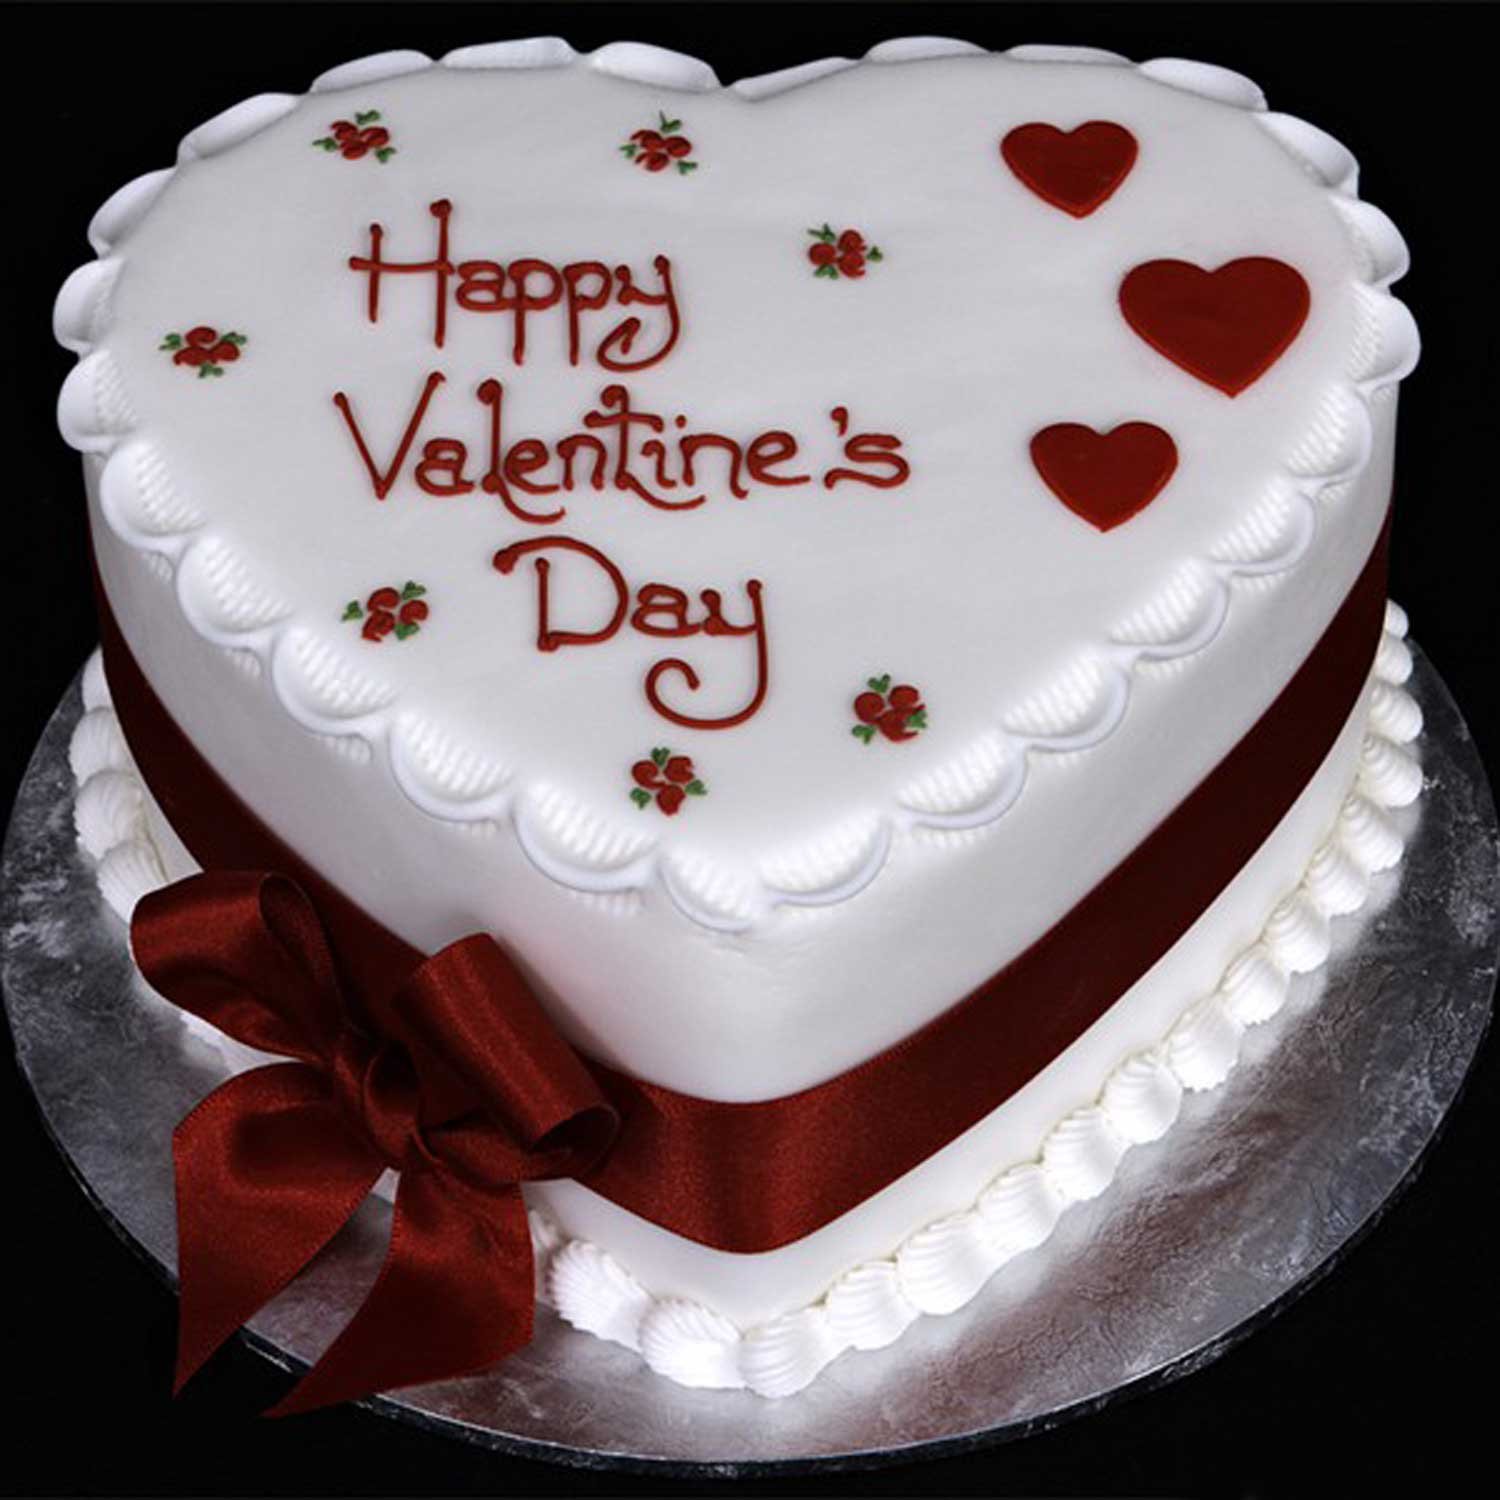 Valentines Day Heart Cake | Cake Delivery Melbourne – Little Cupcakes